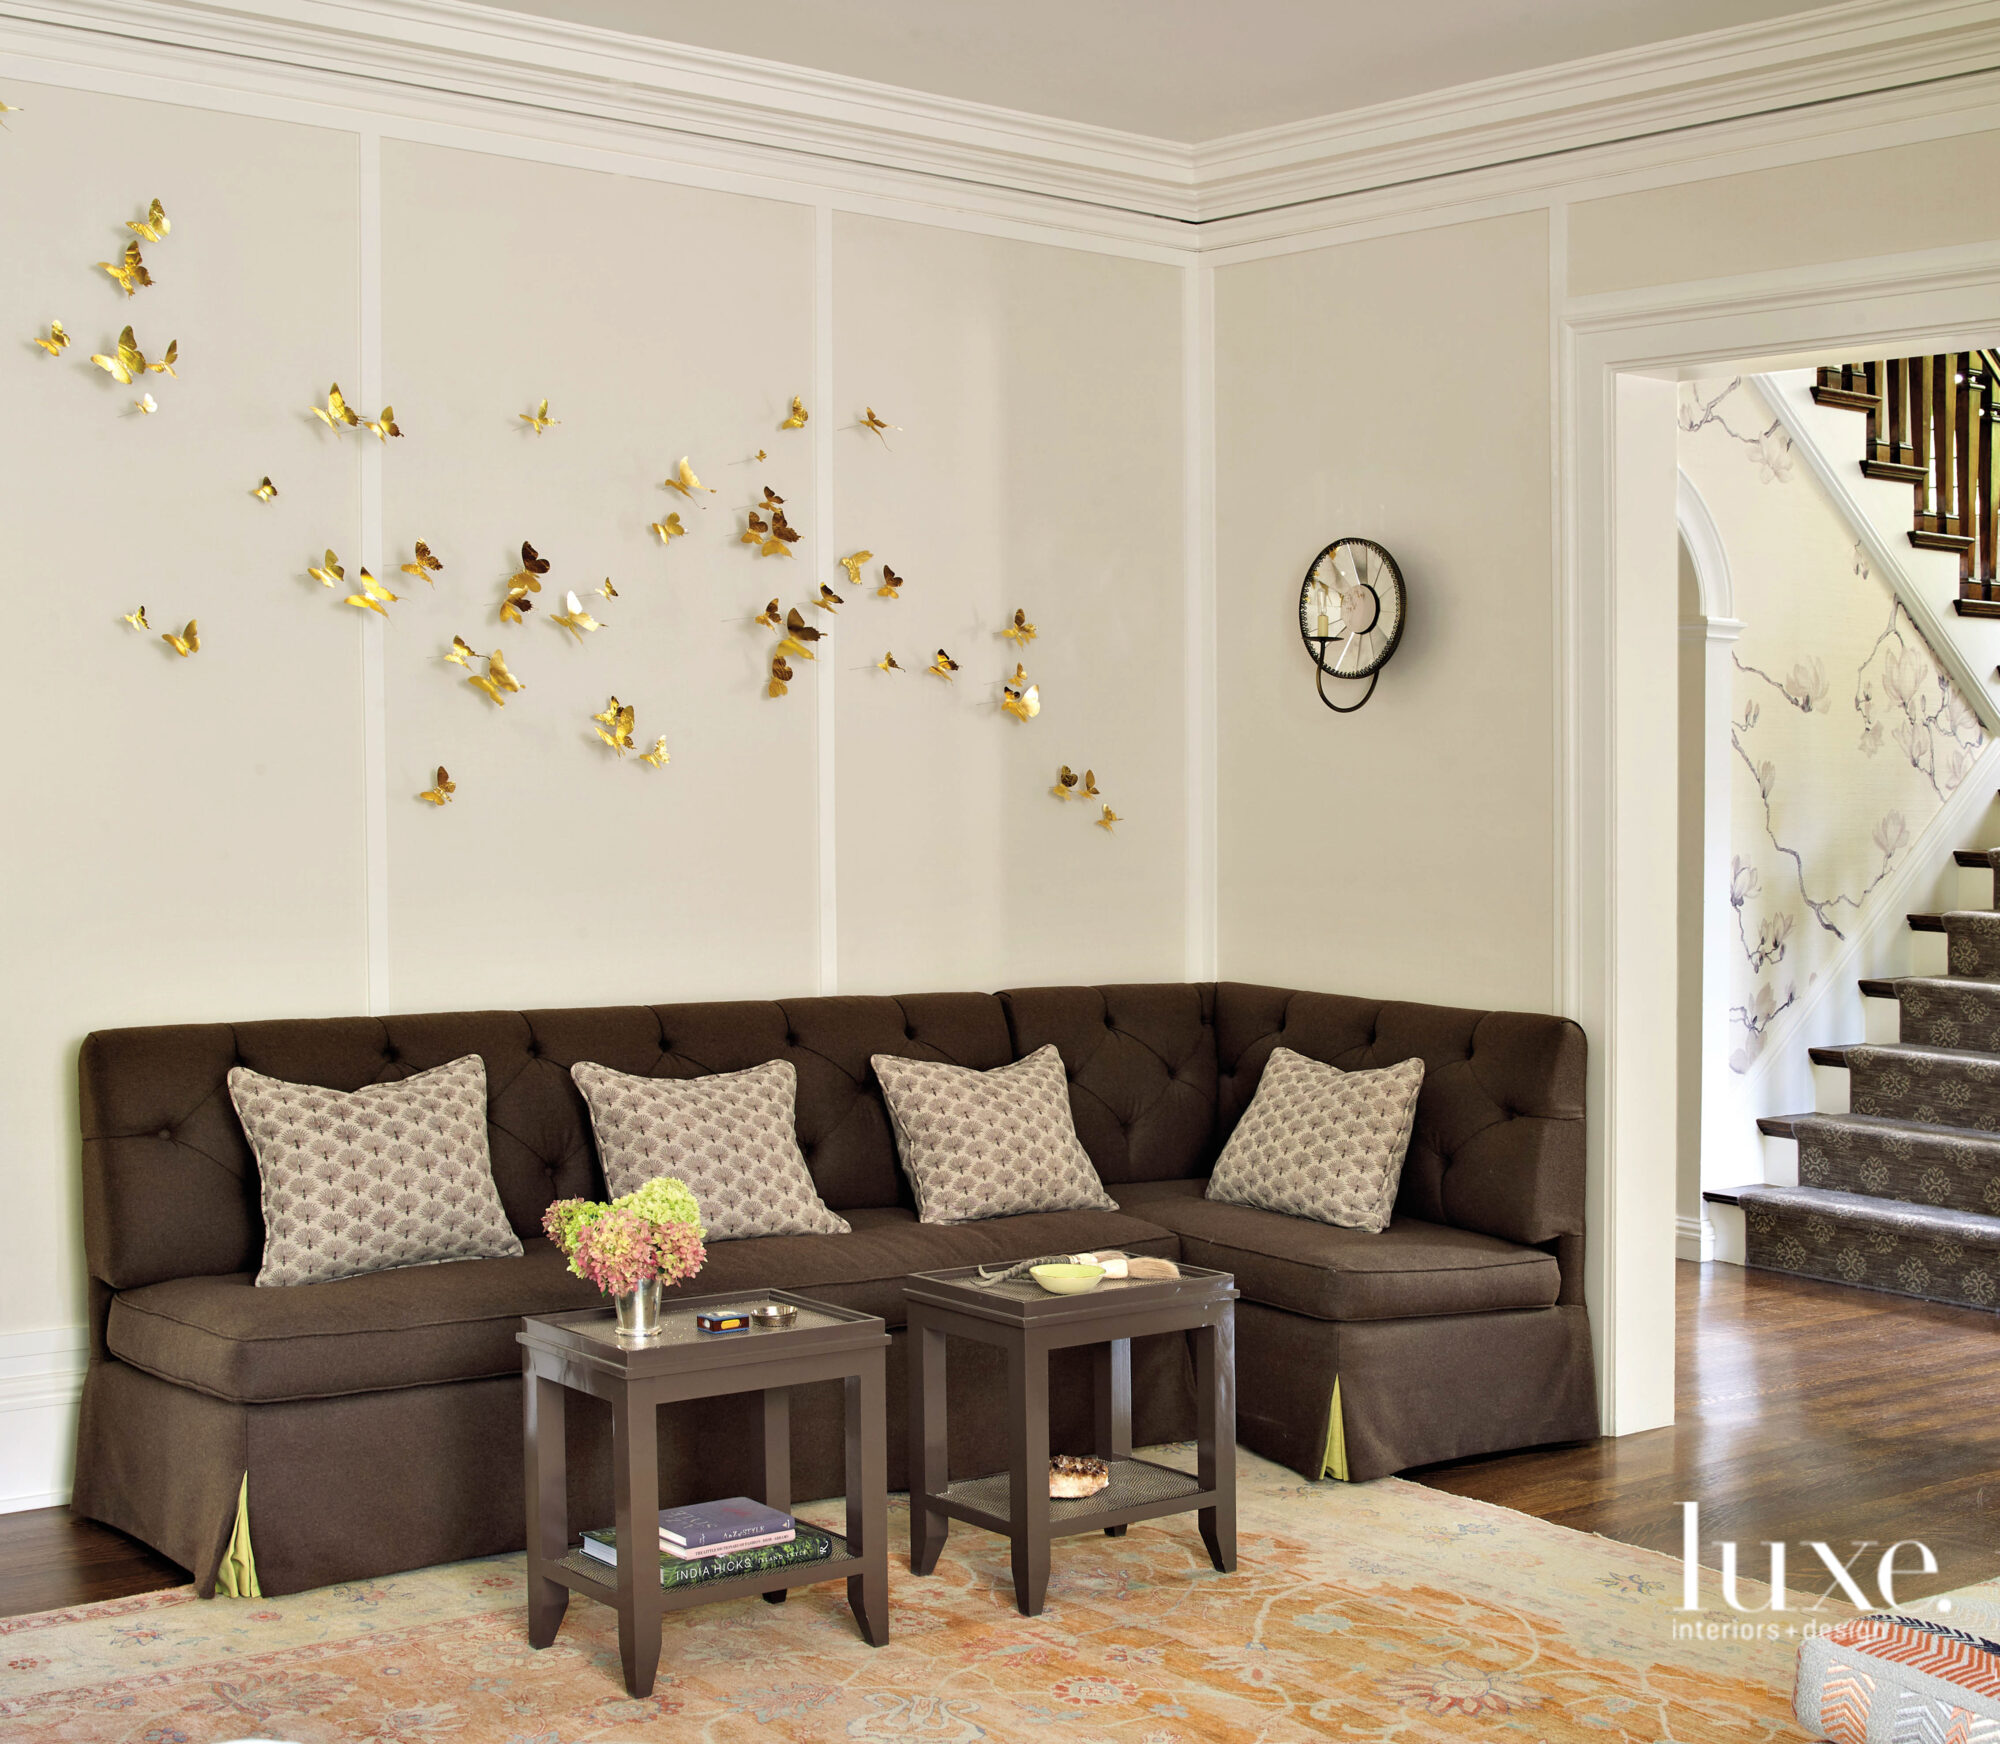 A banquette is tucked into one corner of the living room.